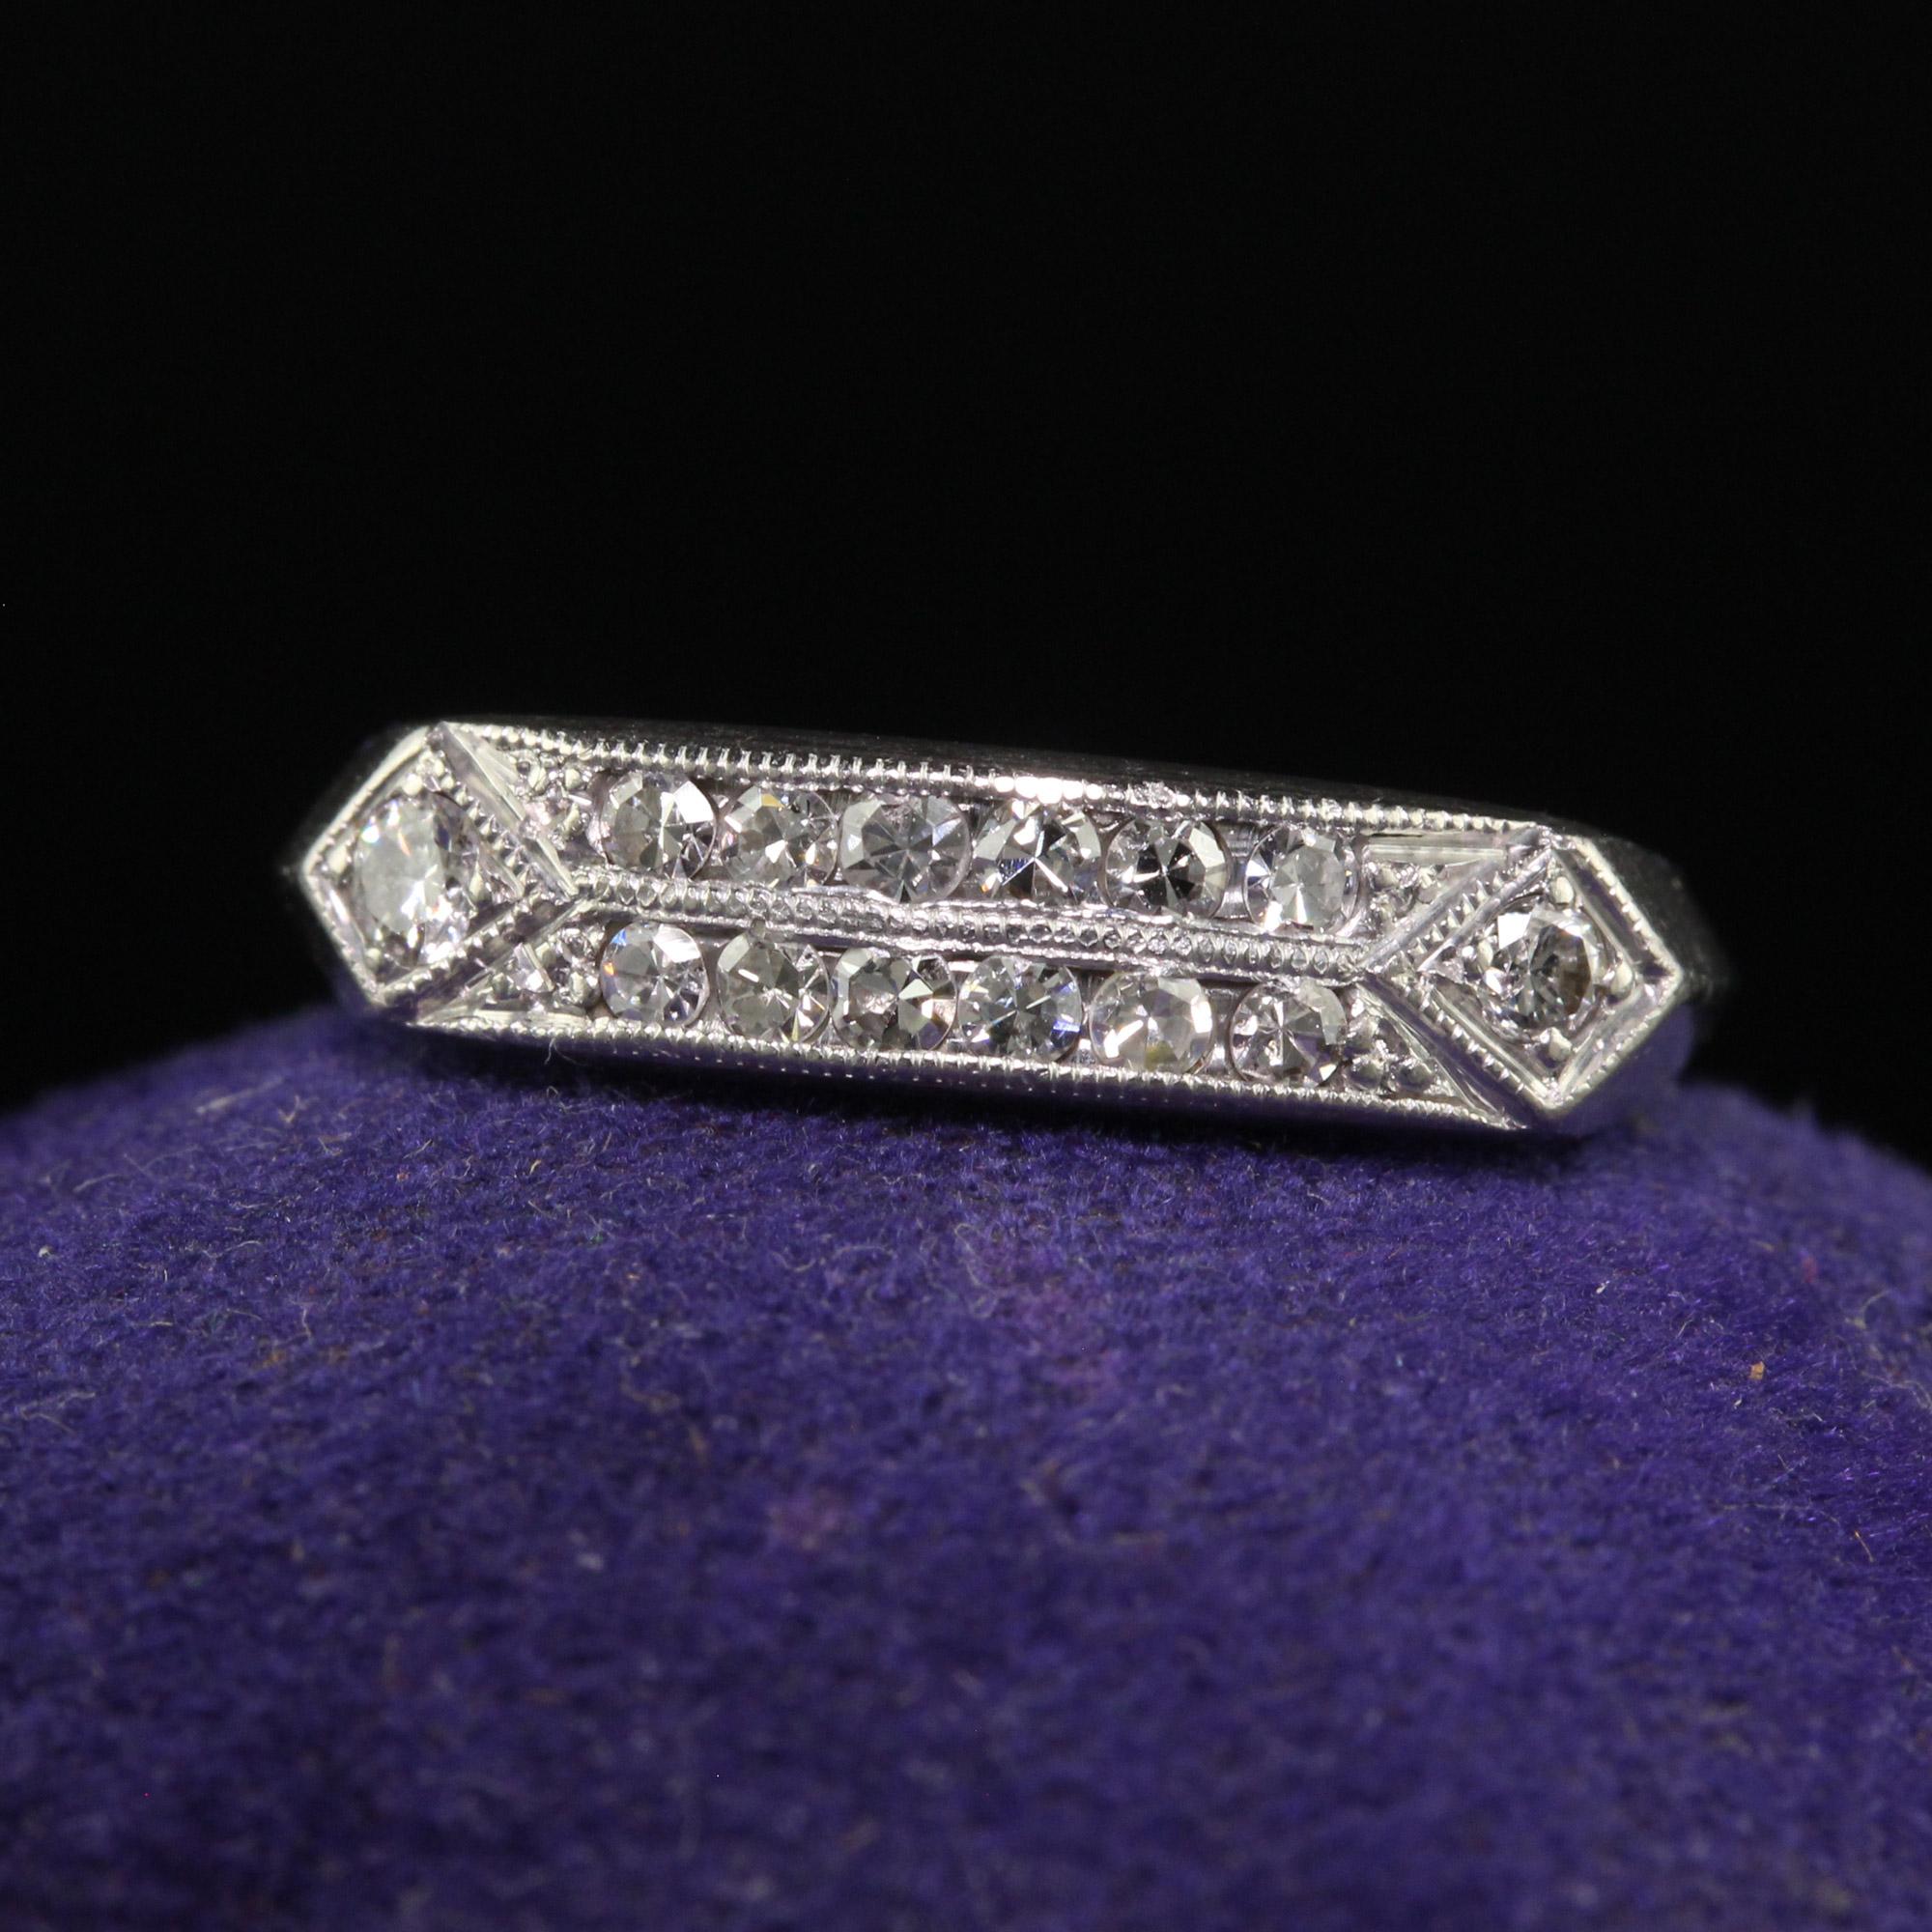 Beautiful Antique Art Deco Platinum Single Cut Diamond Wedding Band - Size 6. This gorgeous antique Art Deco wedding band is crafted in platinum. This ring features two rows of white single cut diamonds with a single cut diamond on each side of the